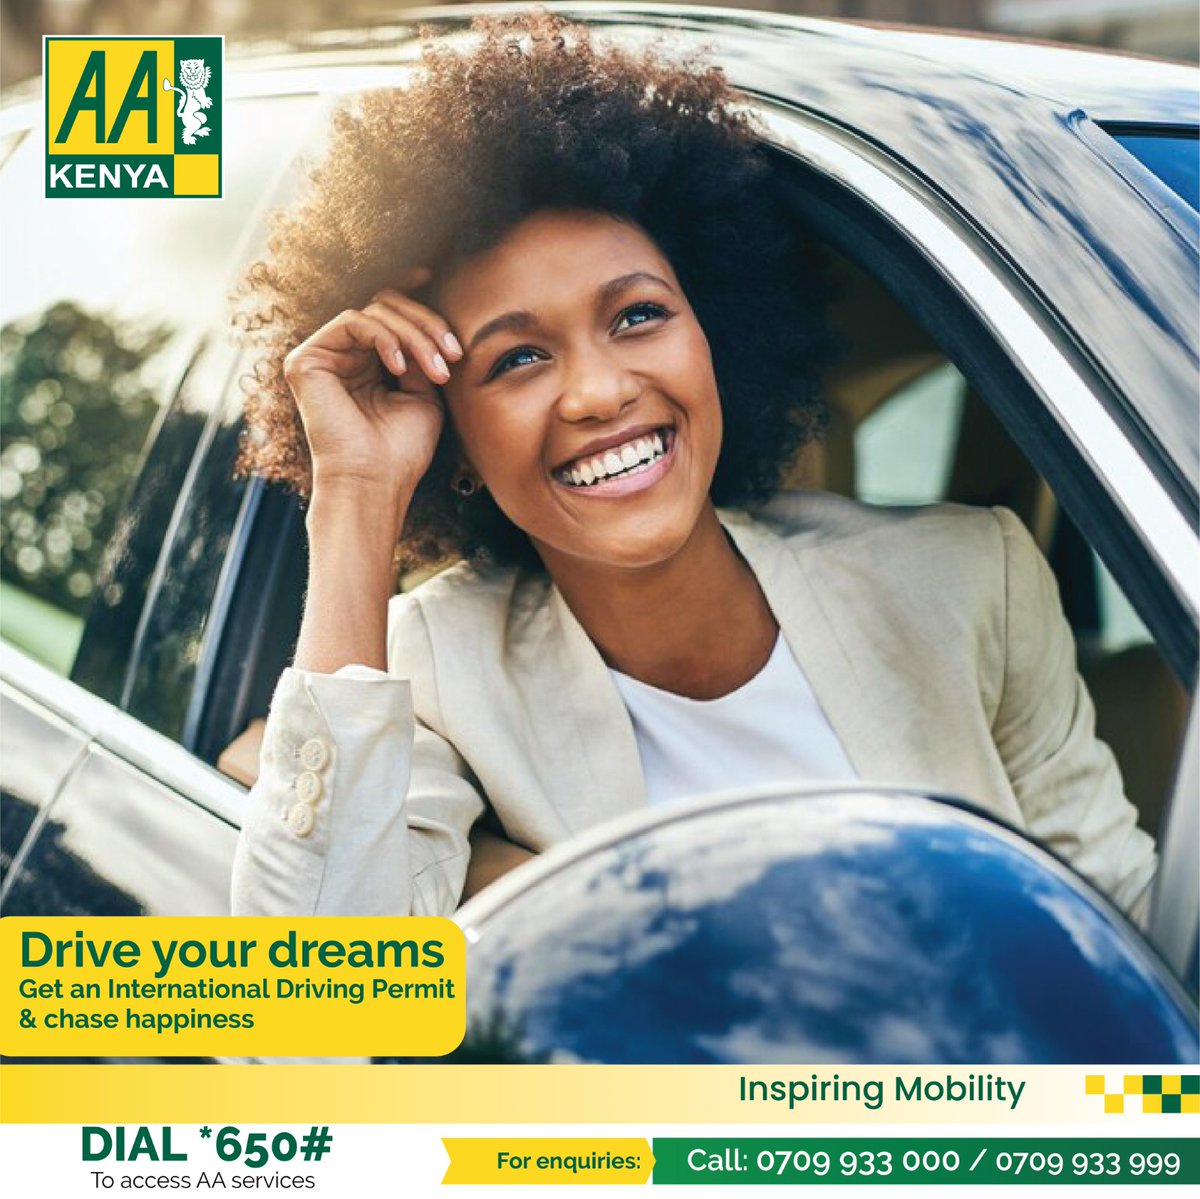 Drive Your Way to Happiness. With an International Driving Permit in hand, you hold the key to unlocking extraordinary adventures and priceless moments. Just walk into any of our branches na tutakusort pap. For more info call us on 0709933000/999
#AAKenyacares #InspiringMobility